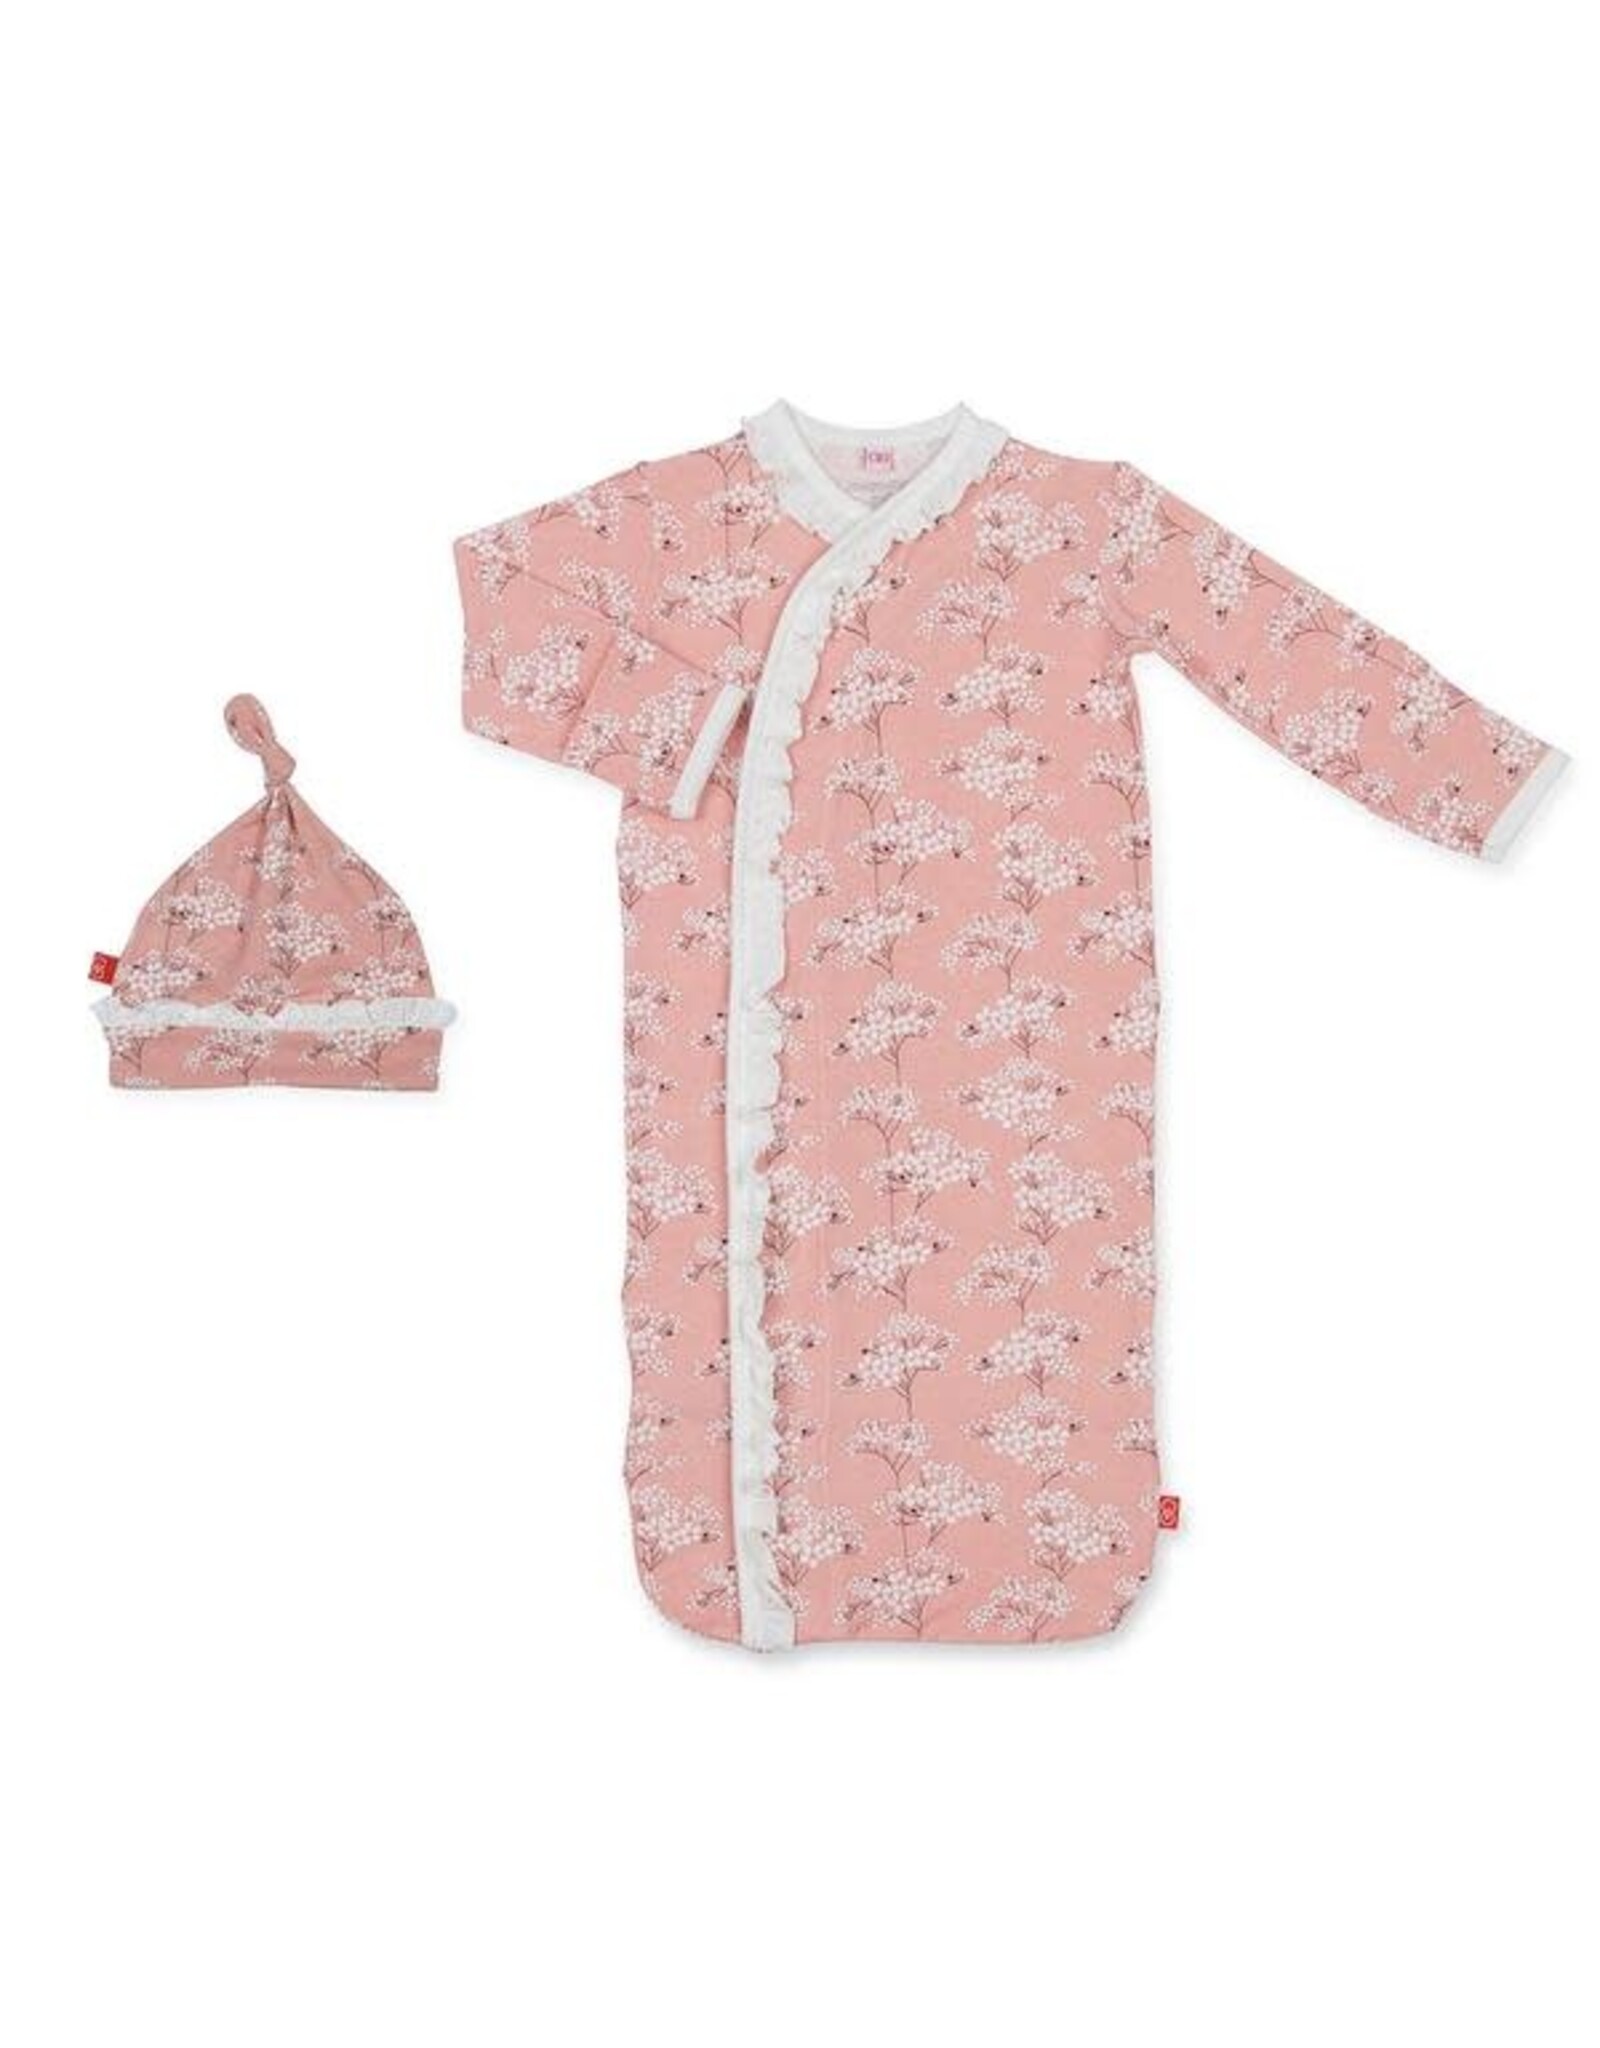 Magnetic Me Magnetic Me- Cherry Blossom Modal Magnetic Gown & Hat Set 0-3M